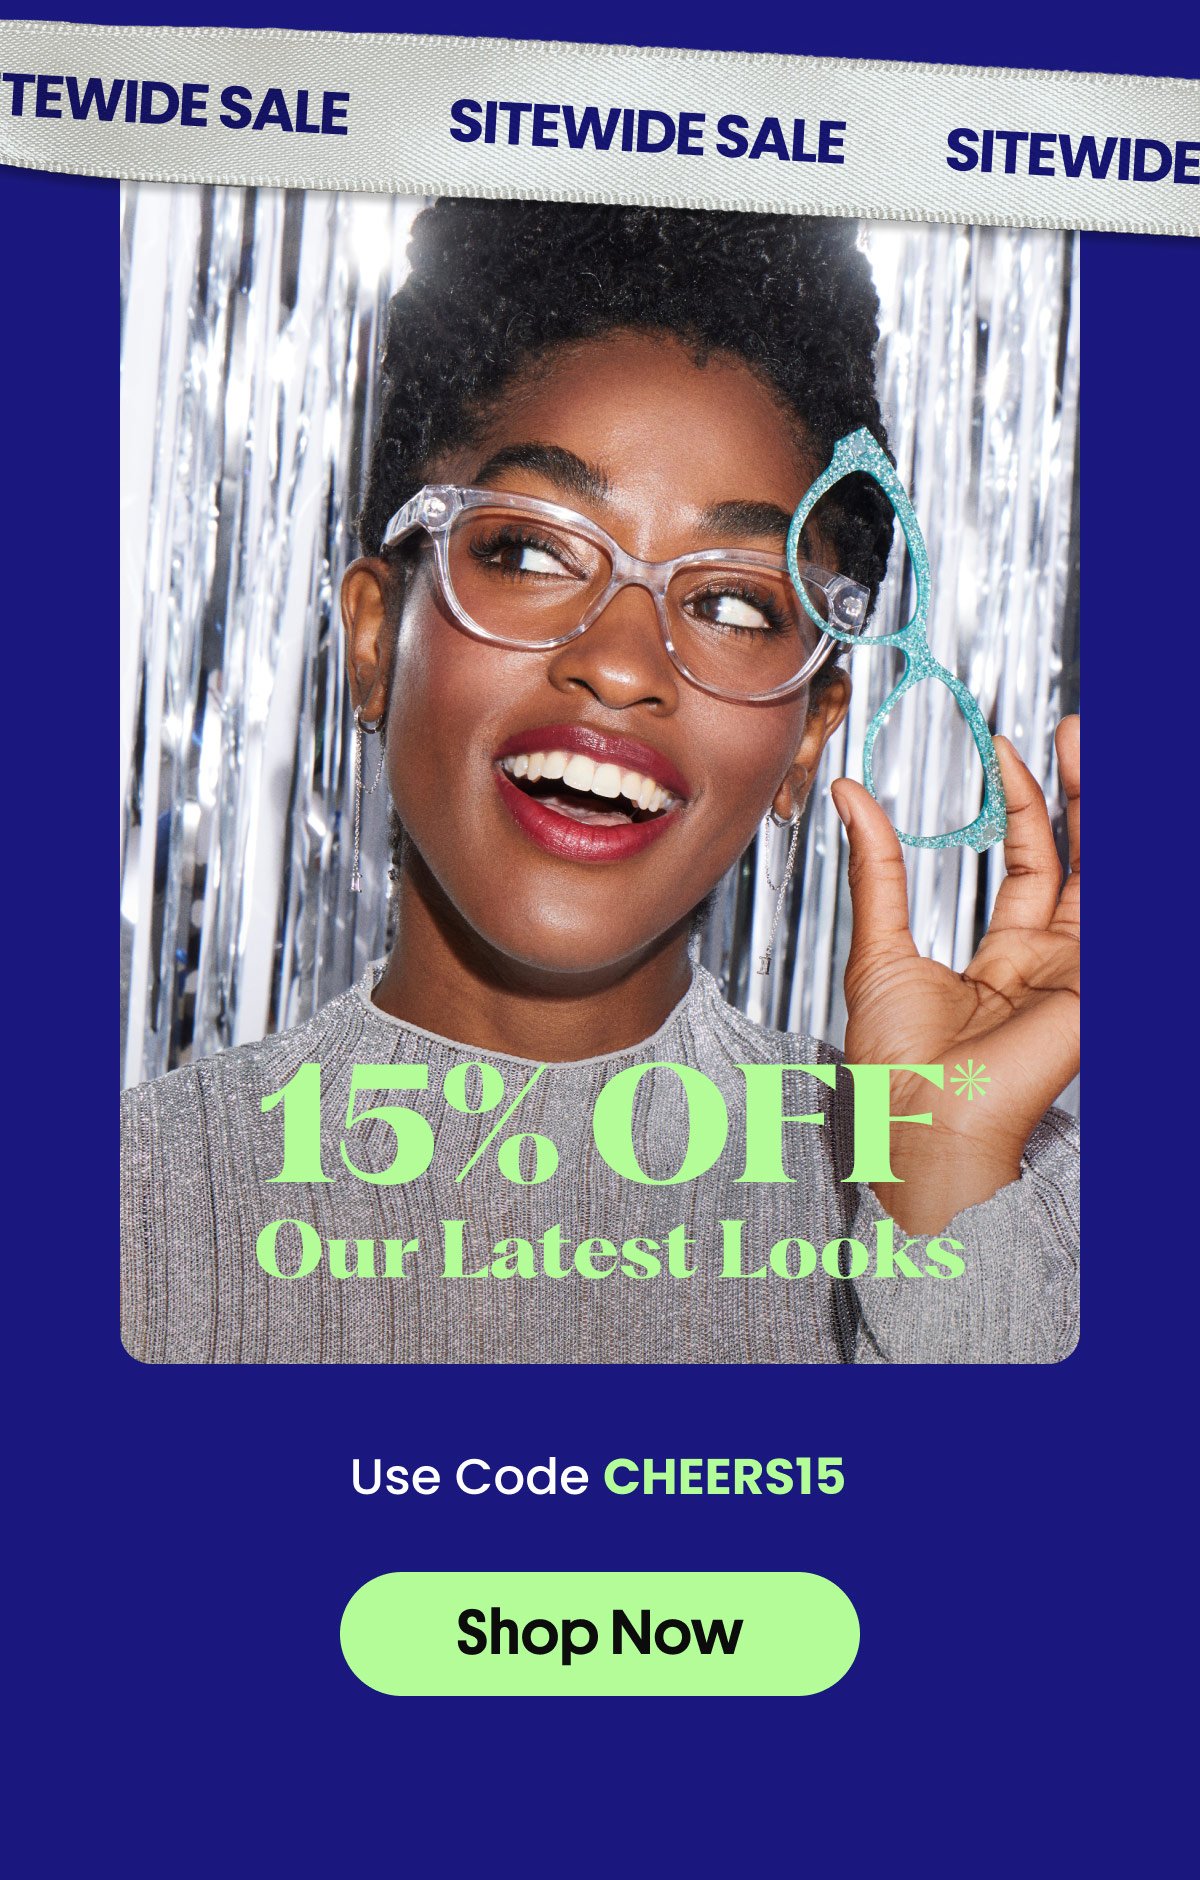 15% Off Our Latest Looks